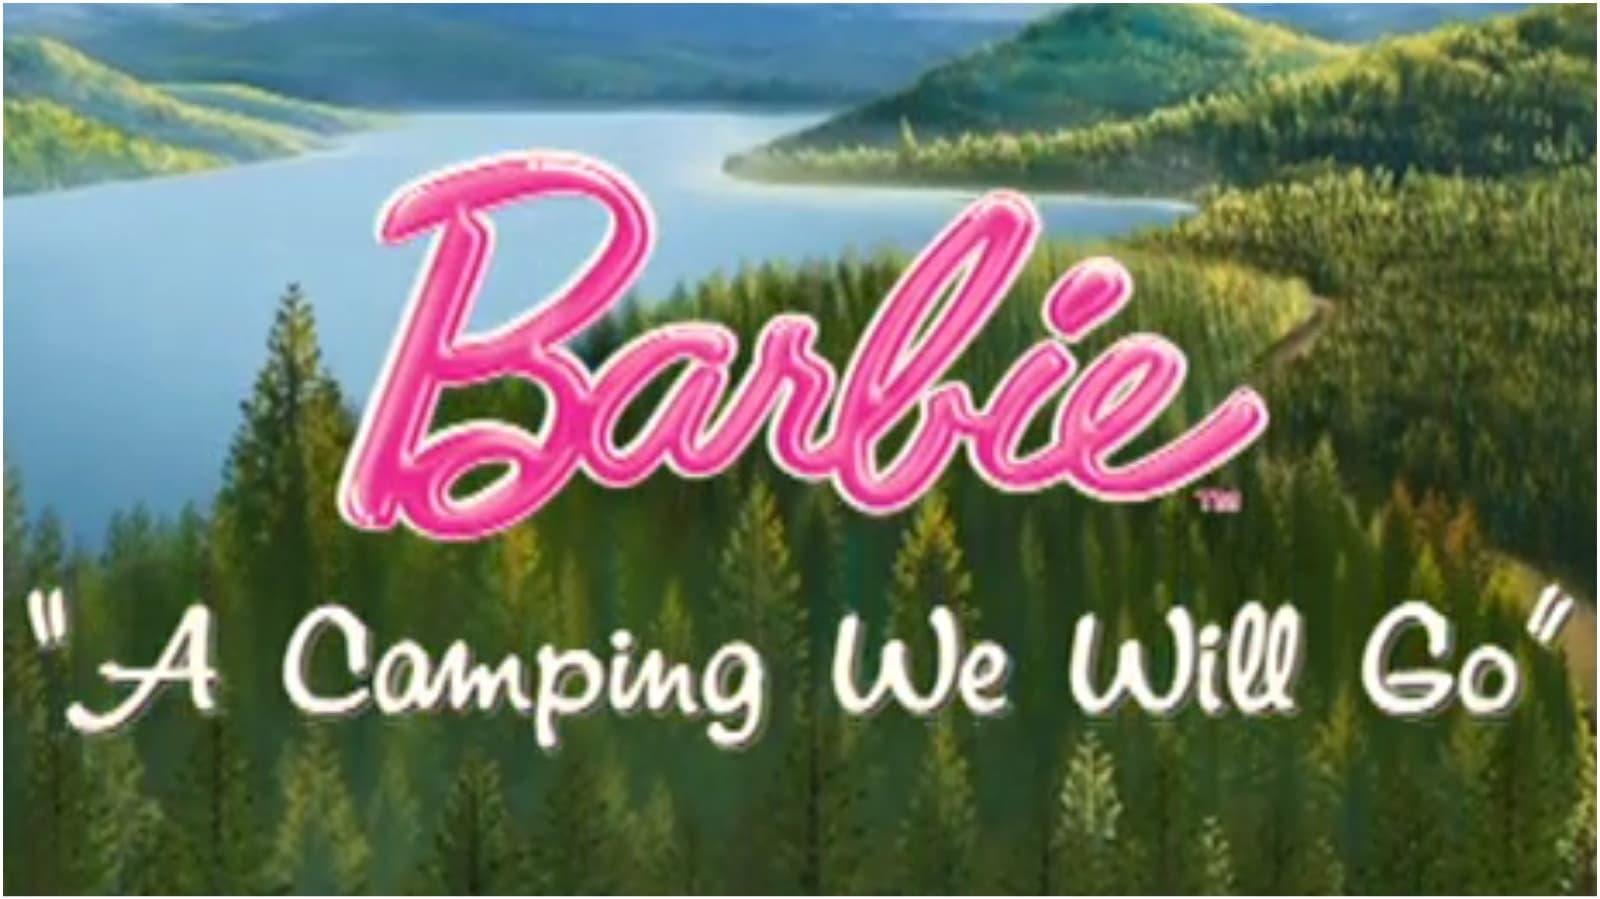 Barbie: A Camping We Will Go backdrop